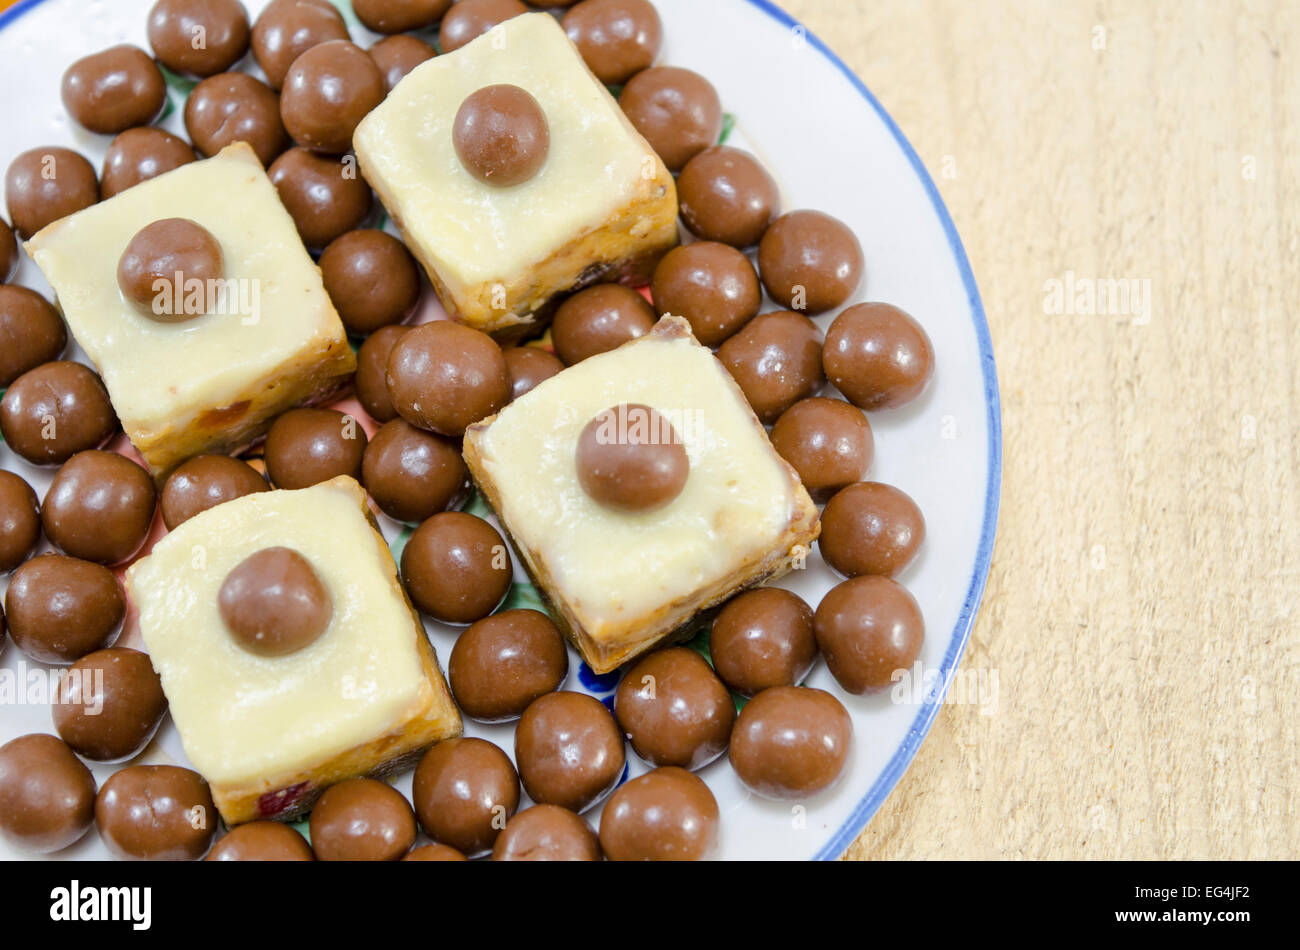 Homemade desserts with a chocolate ball on top Stock Photo